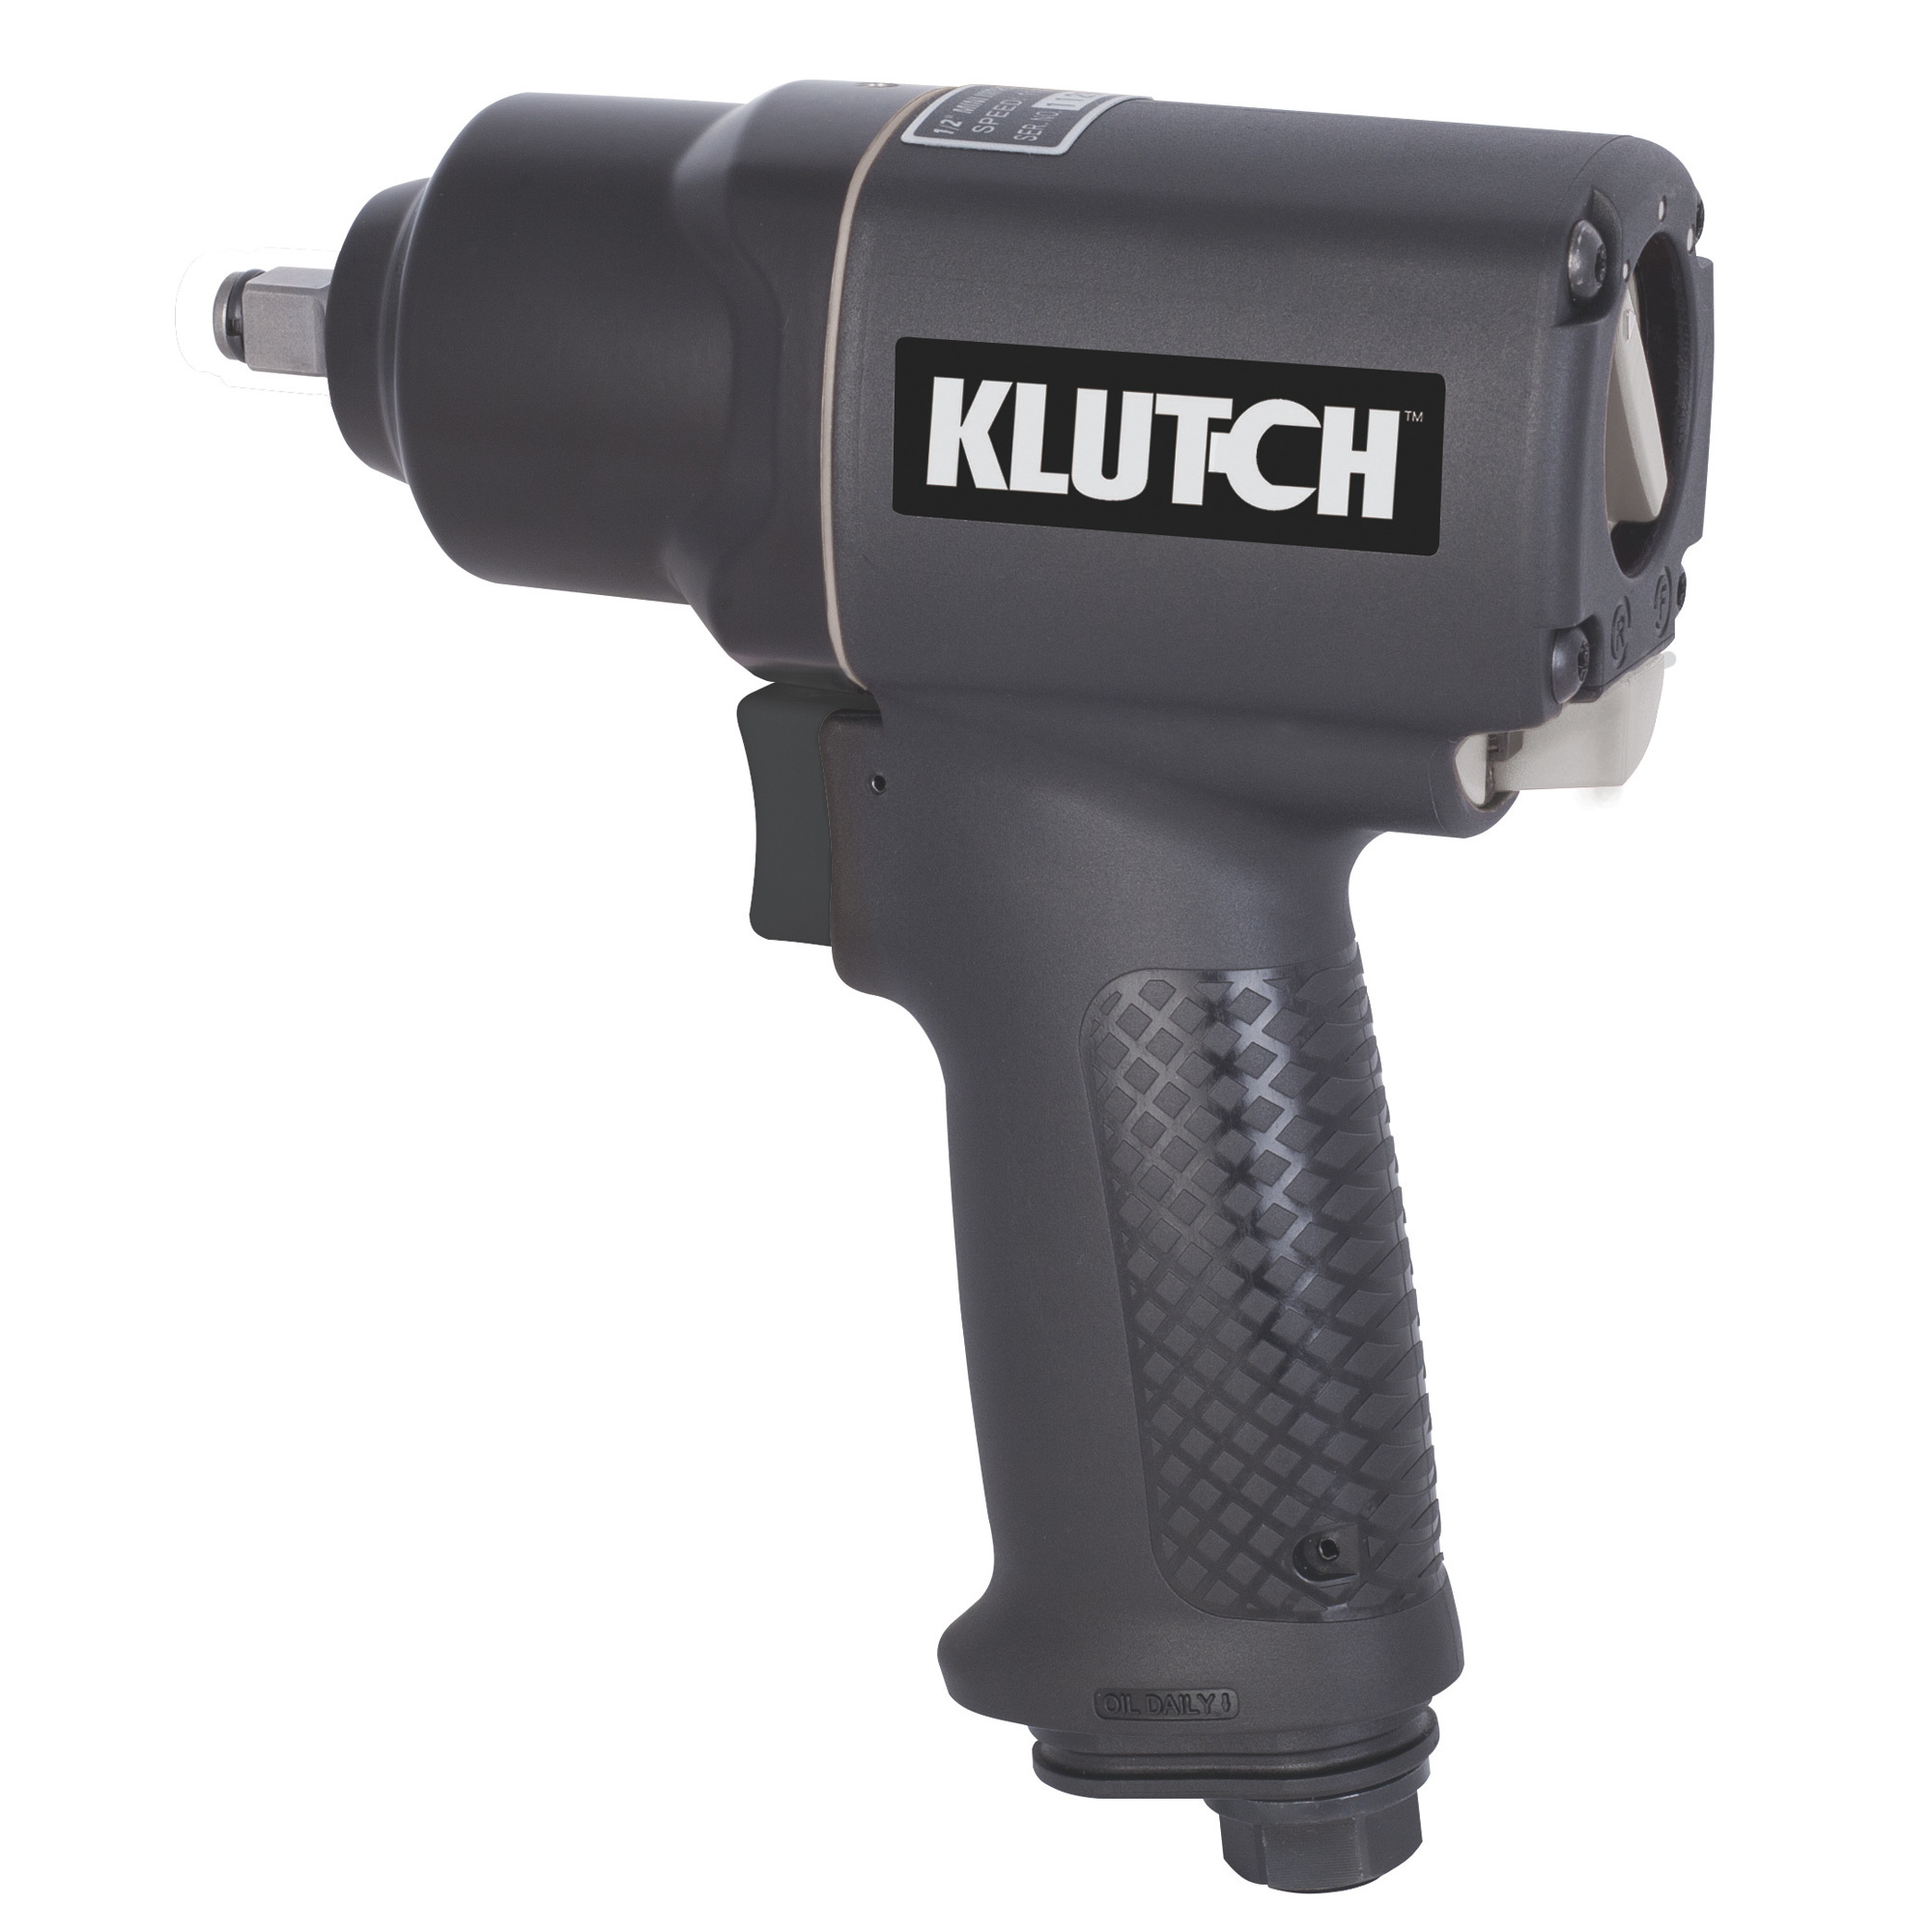 Klutch Air Impact Wrench (3/8" Drive, 500 Ft./Lbs. Torque, 12,000 RPM, 1500 IPM) $50 & More + Free Shipping